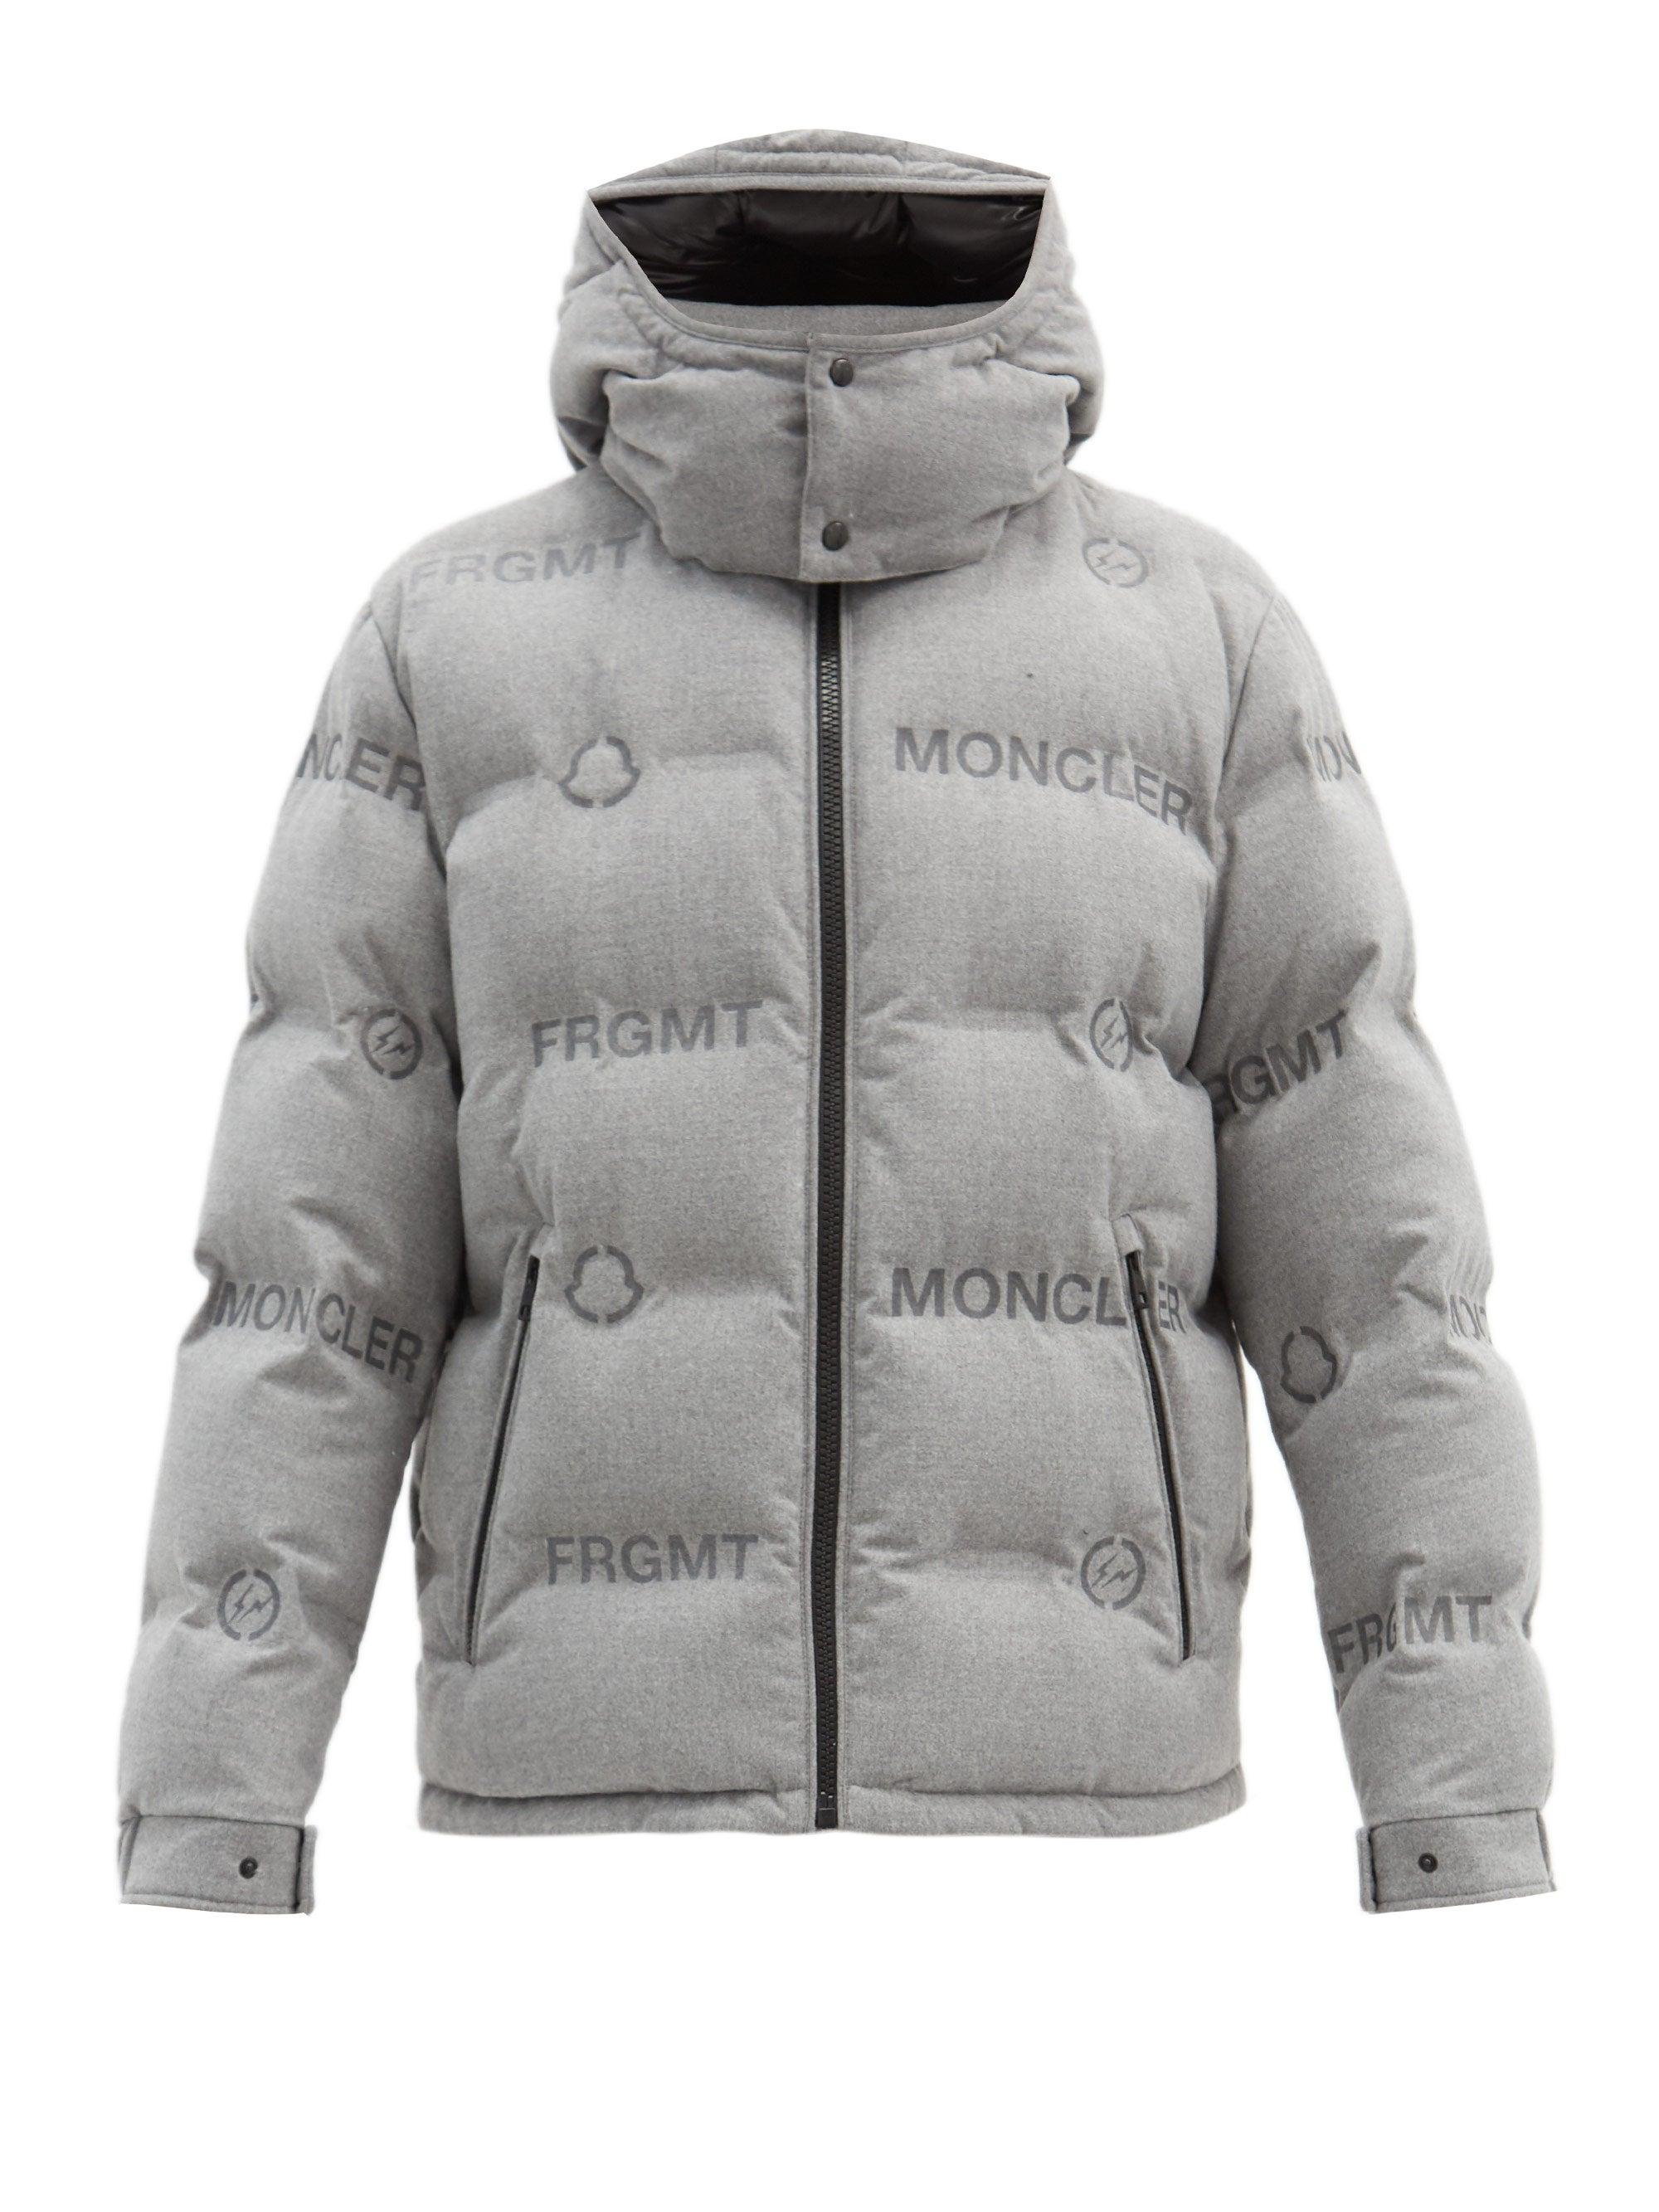 7 MONCLER FRAGMENT Logo-print Quilted Down Jacket in Gray for Men | Lyst